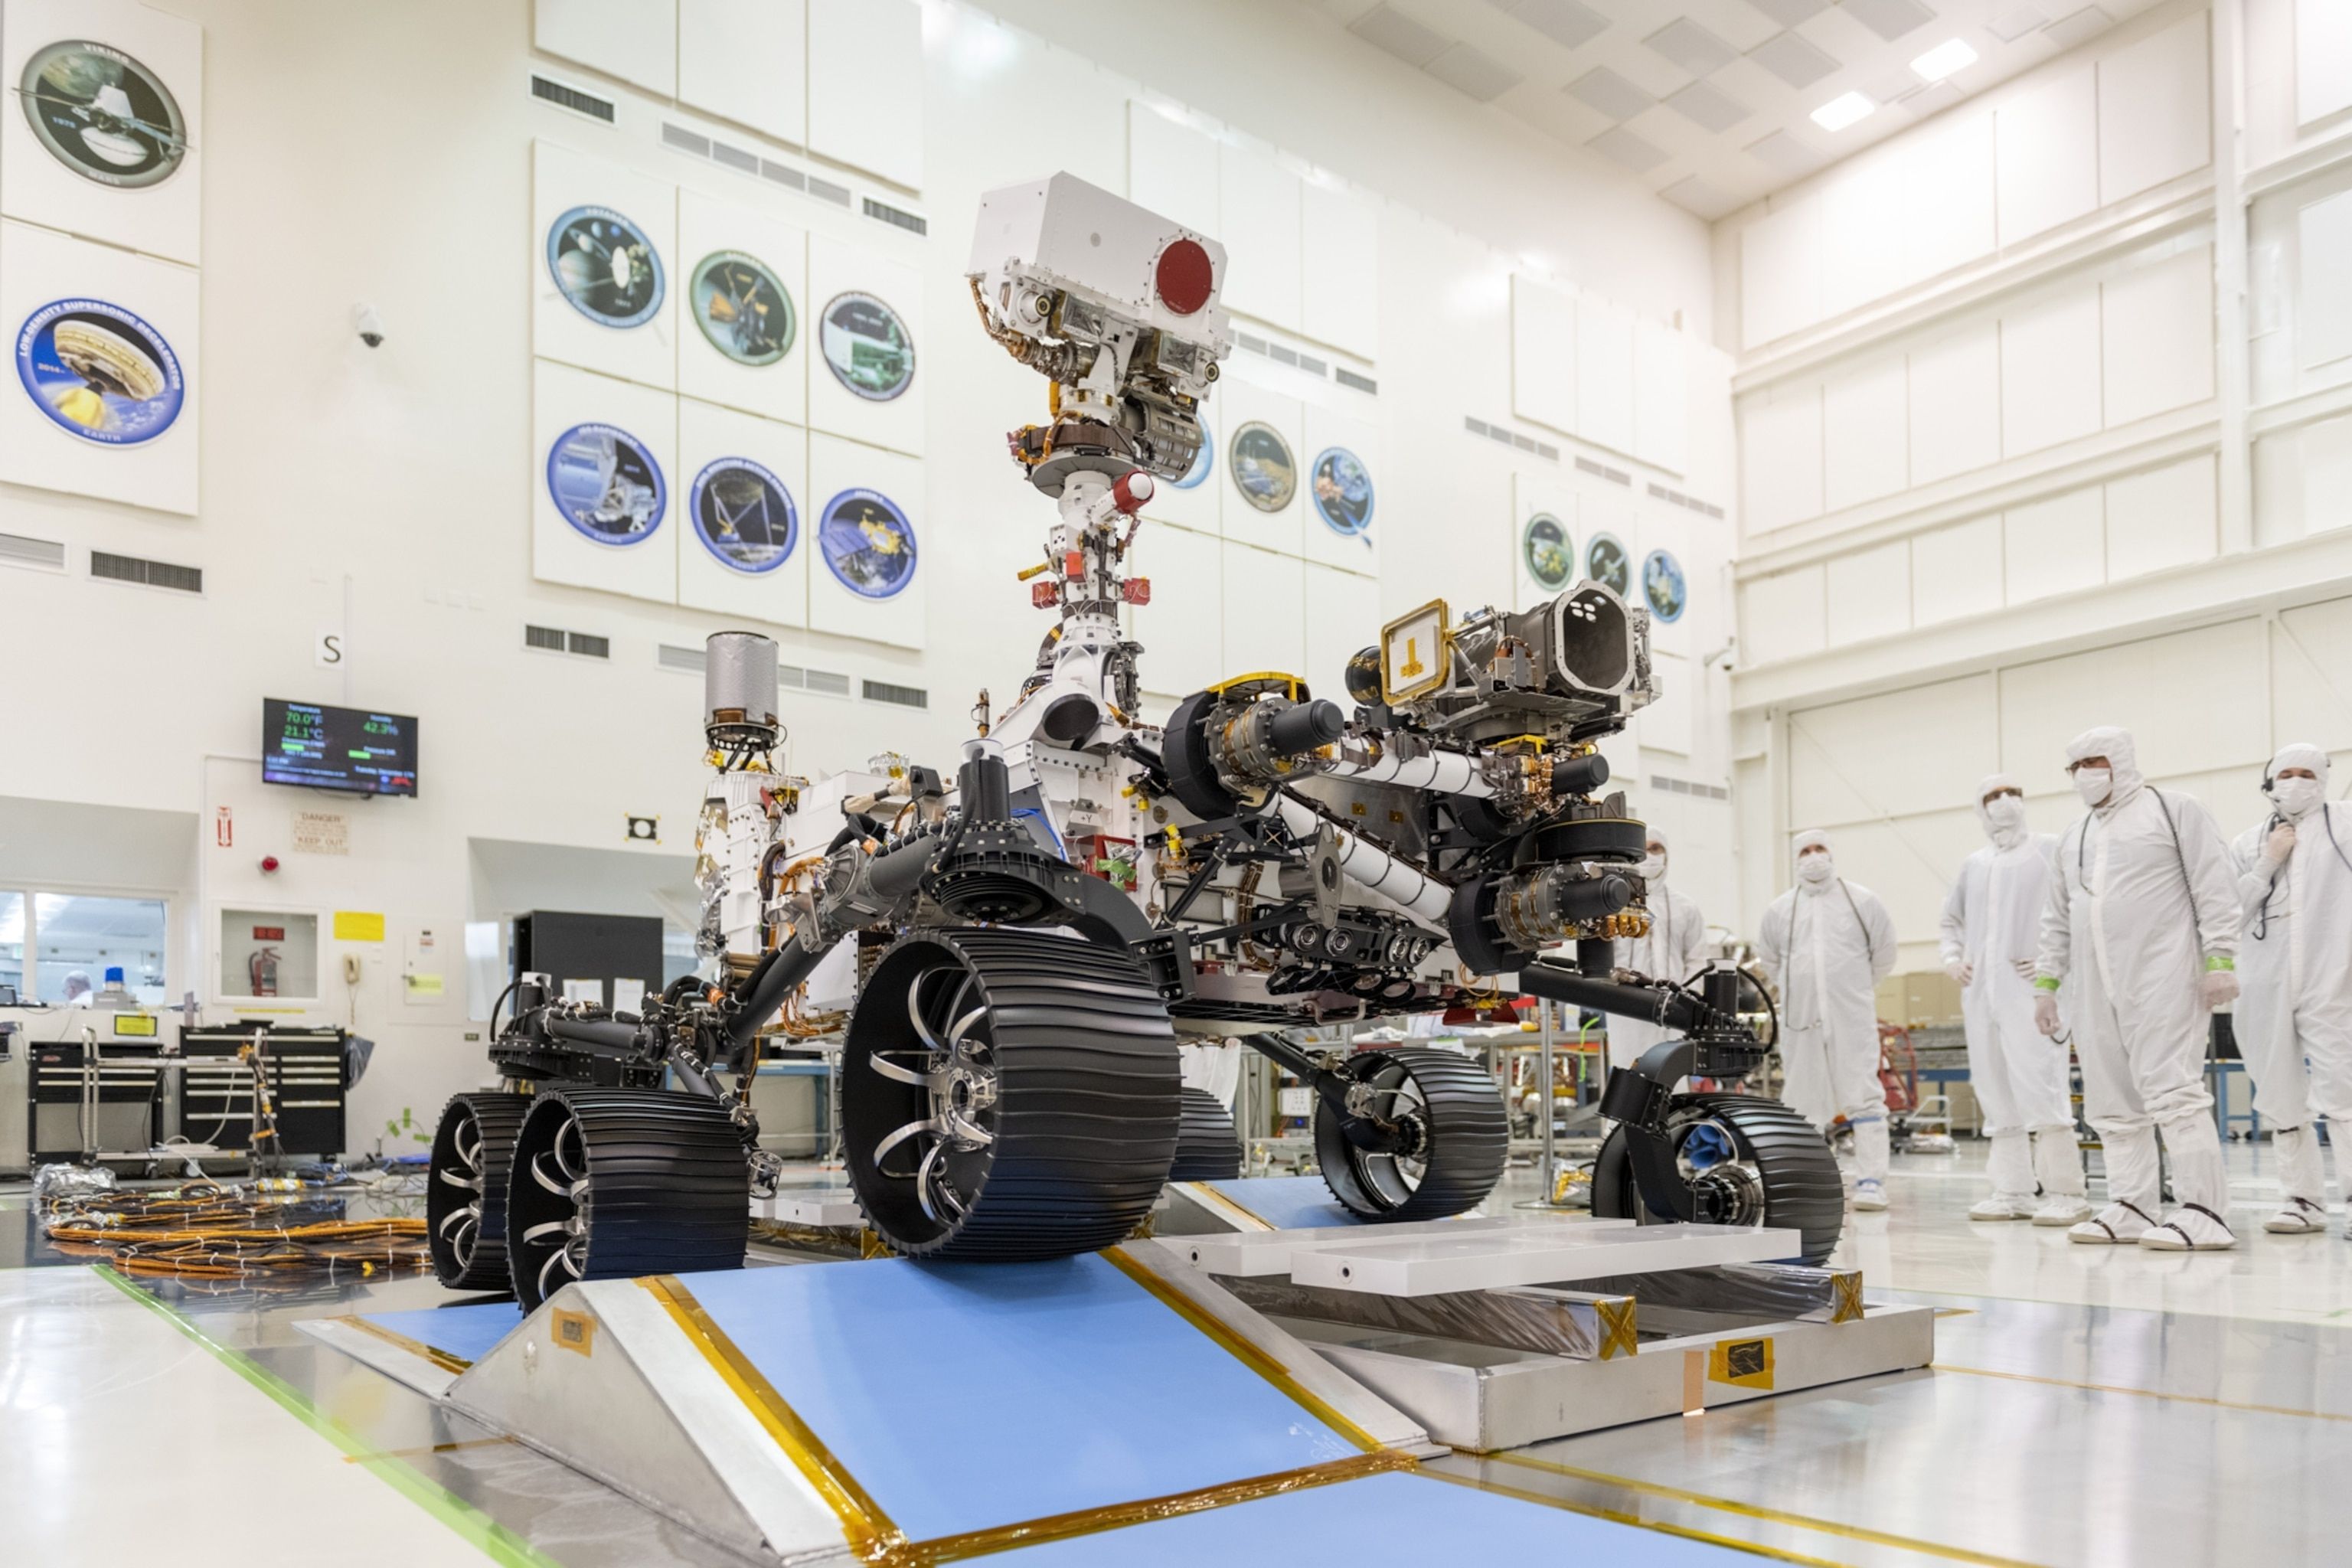 Perseverance rover launches on mission .nationalgeographic.com